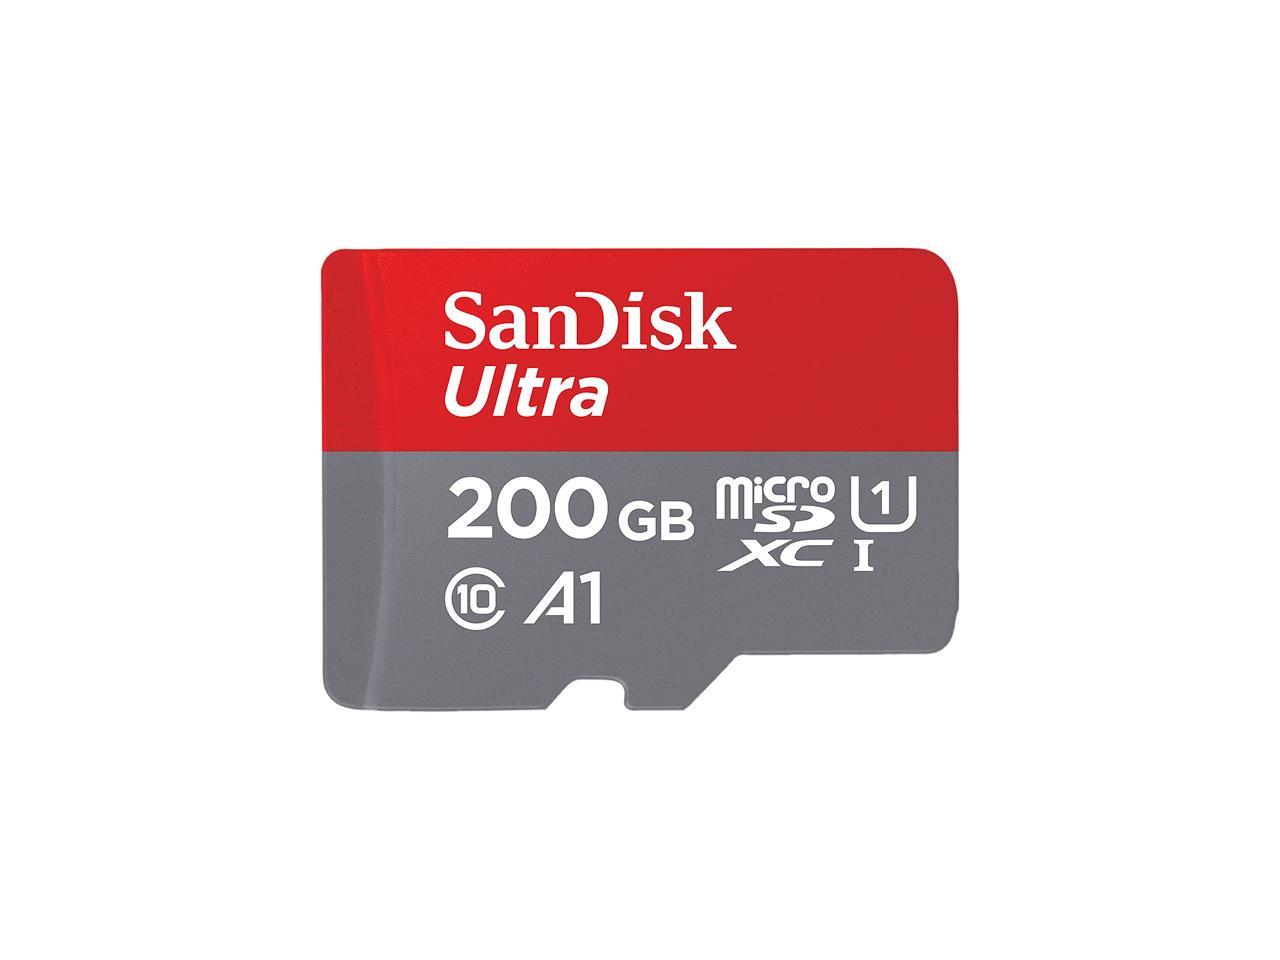 100MBs A1 U1 C10 Works with SanDisk SanDisk Ultra 200GB MicroSDXC Verified for Celkon Millennia Q450 by SanFlash